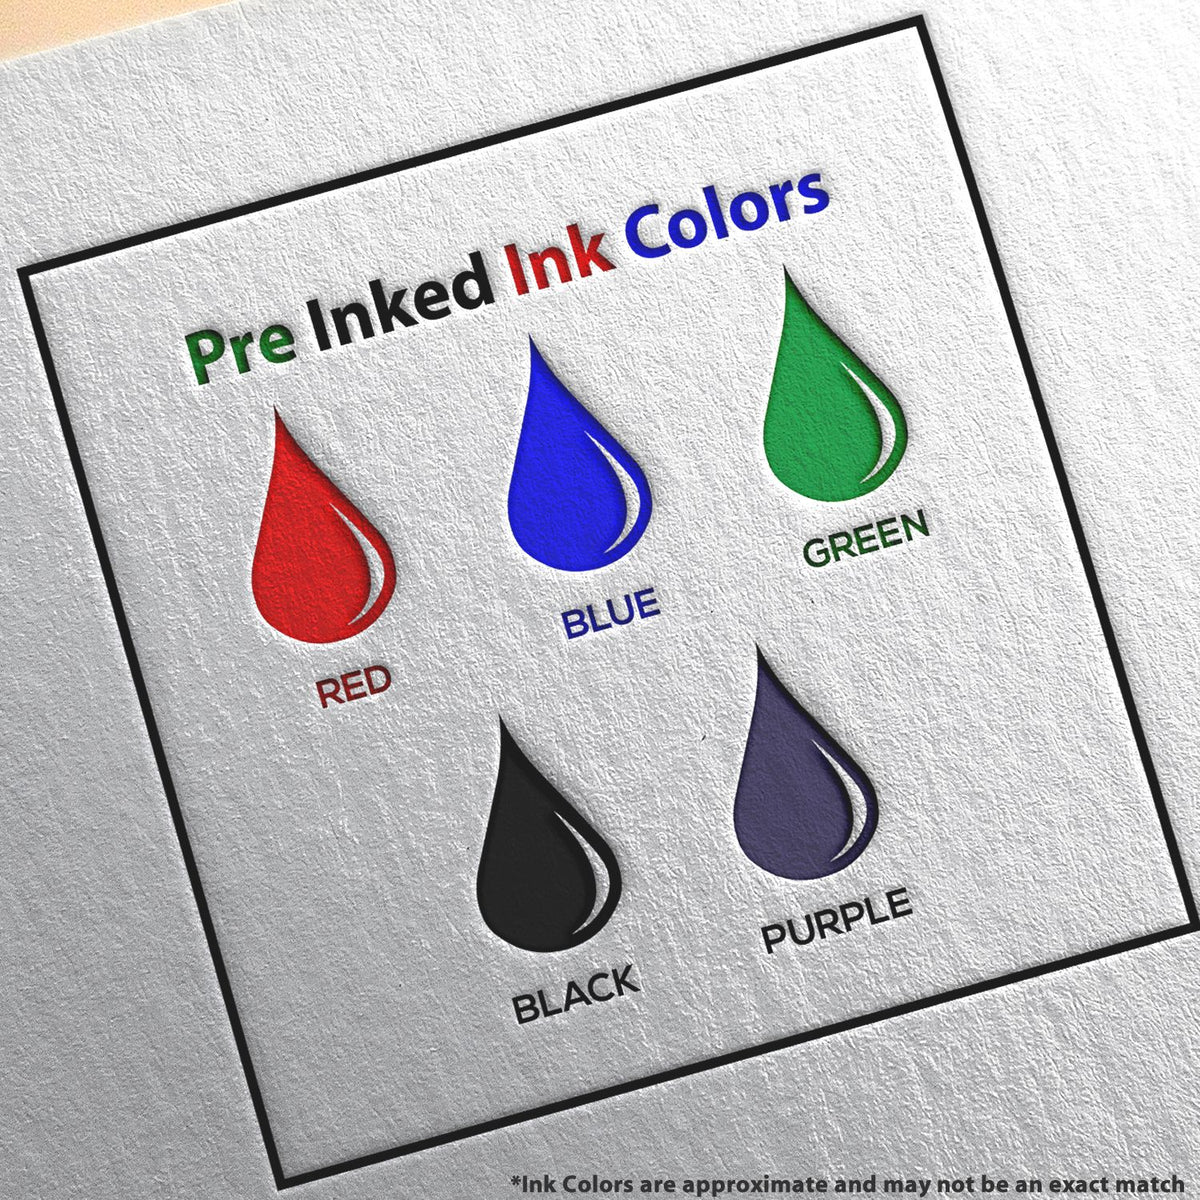 A picture showing the different ink colors or hues available for the Slim Pre-Inked Missouri Architect Seal Stamp product.